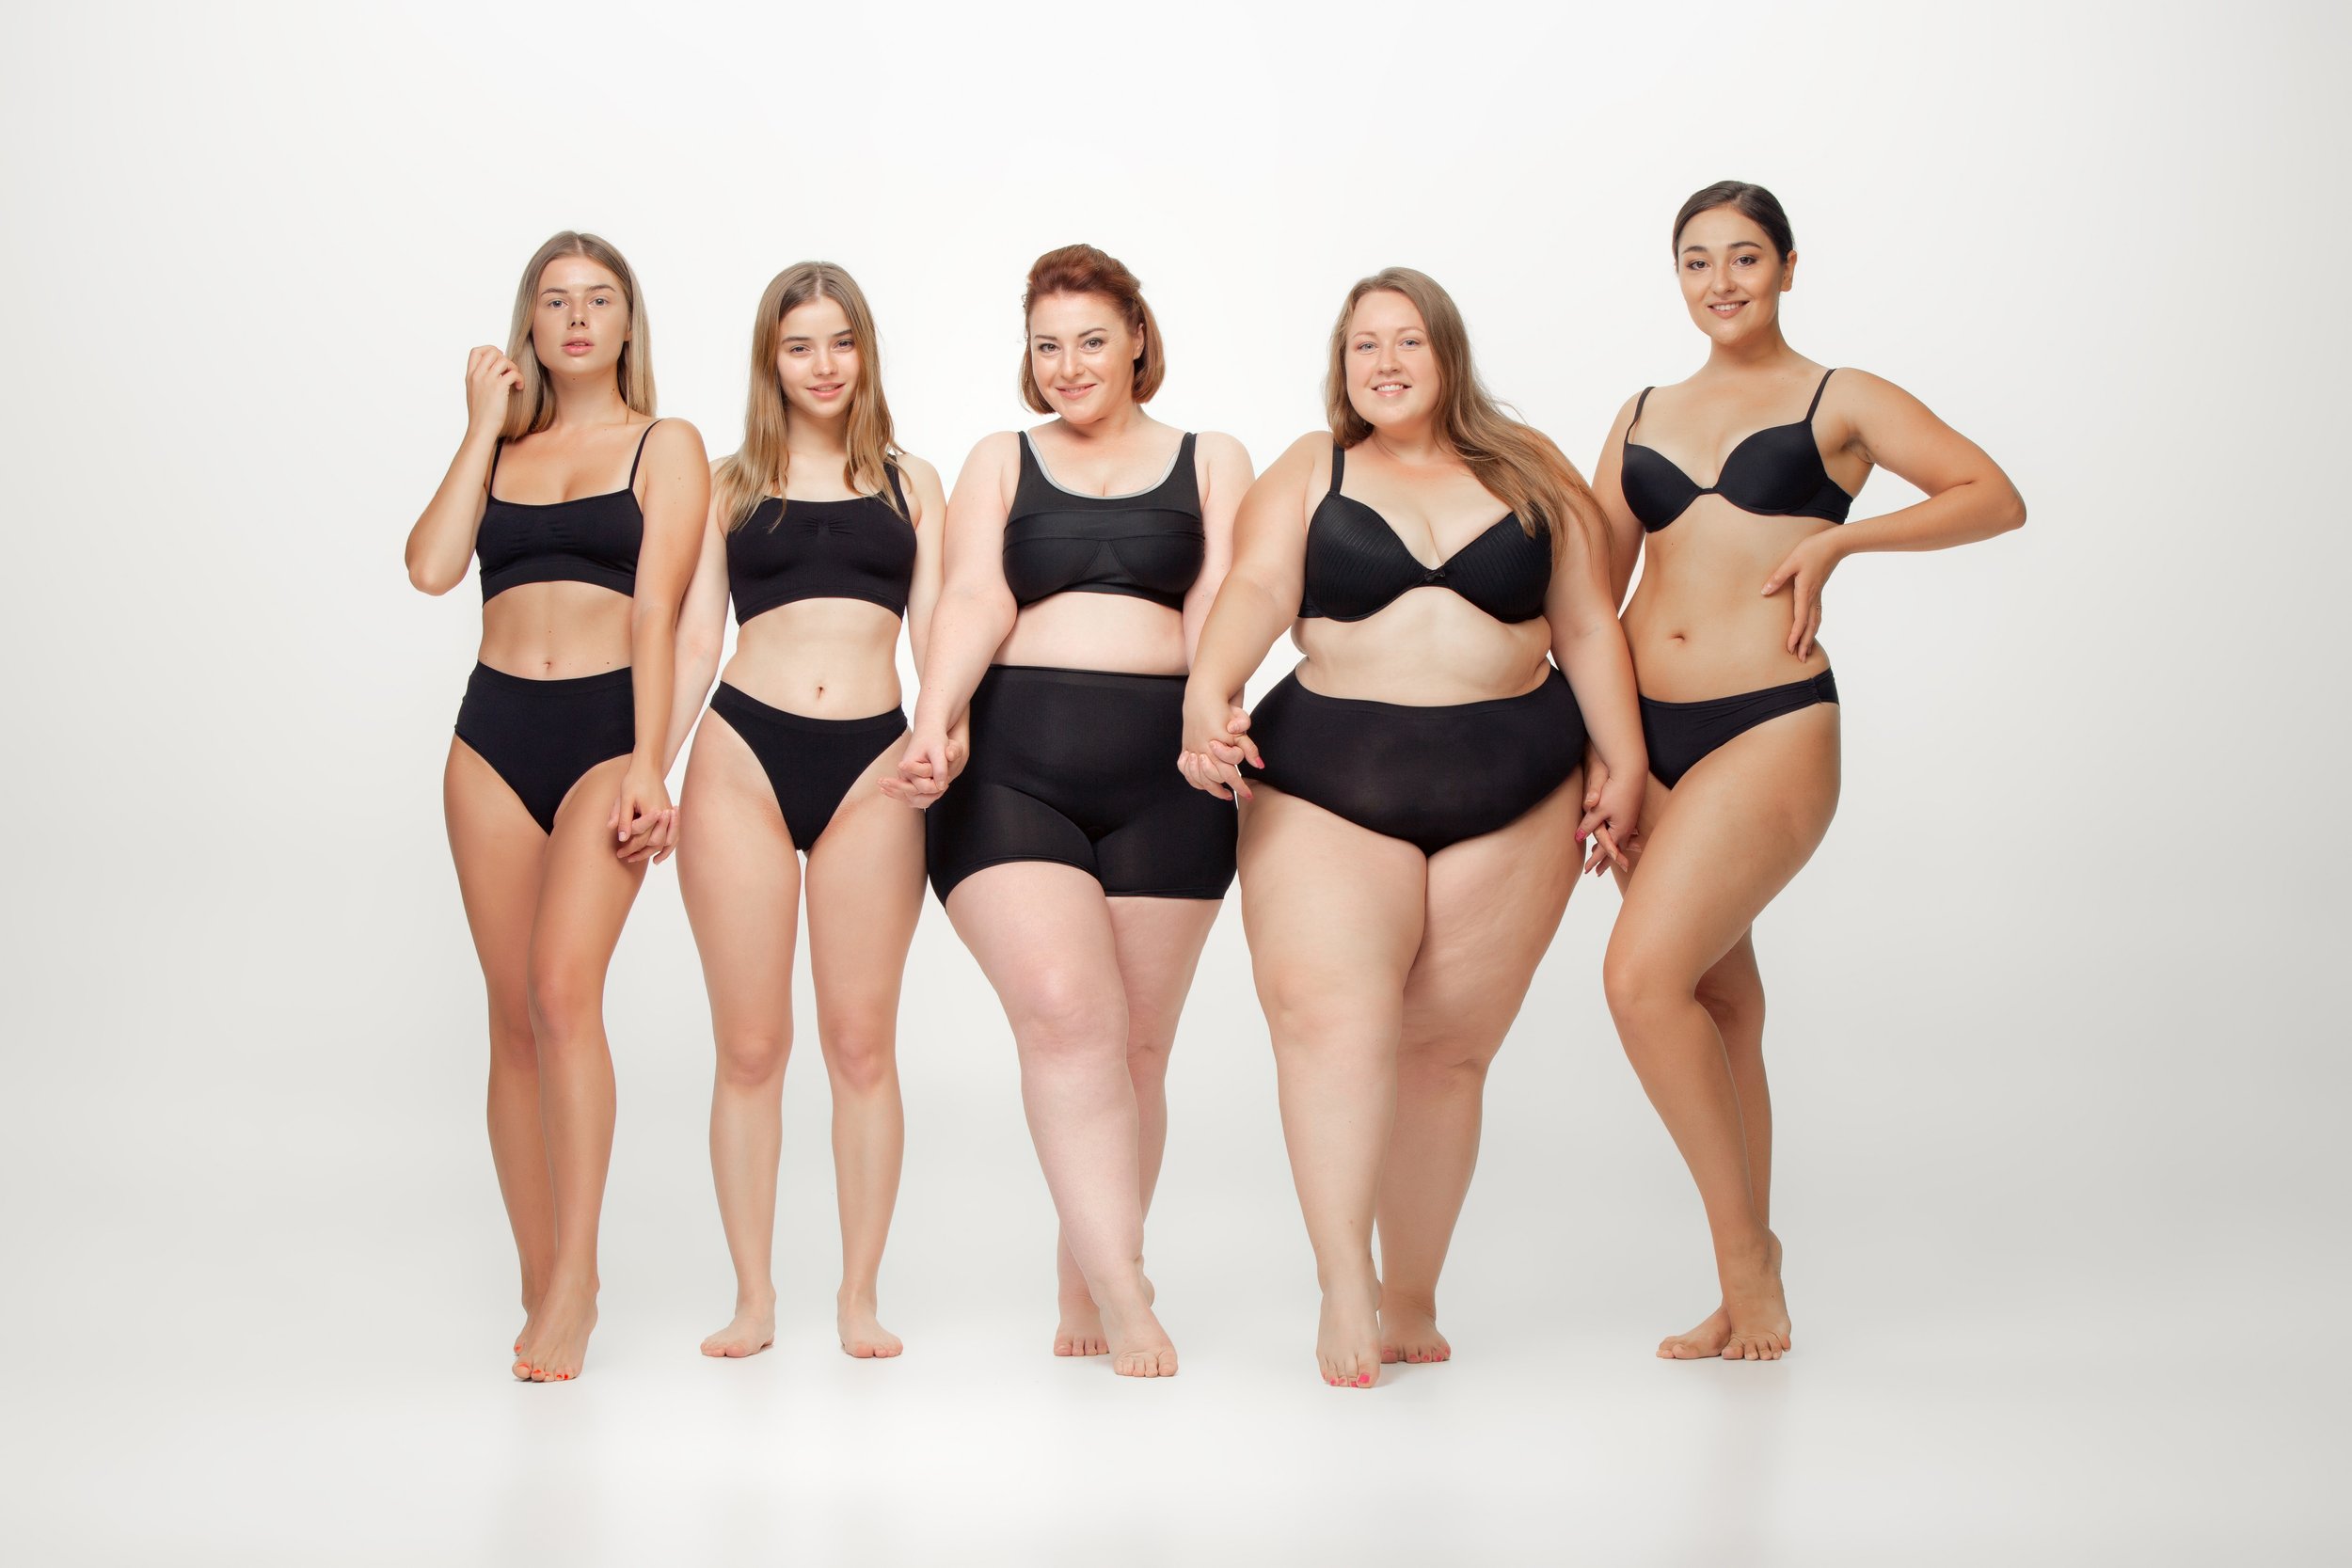 How To Choose Perfect Lingerie For Your Body Type